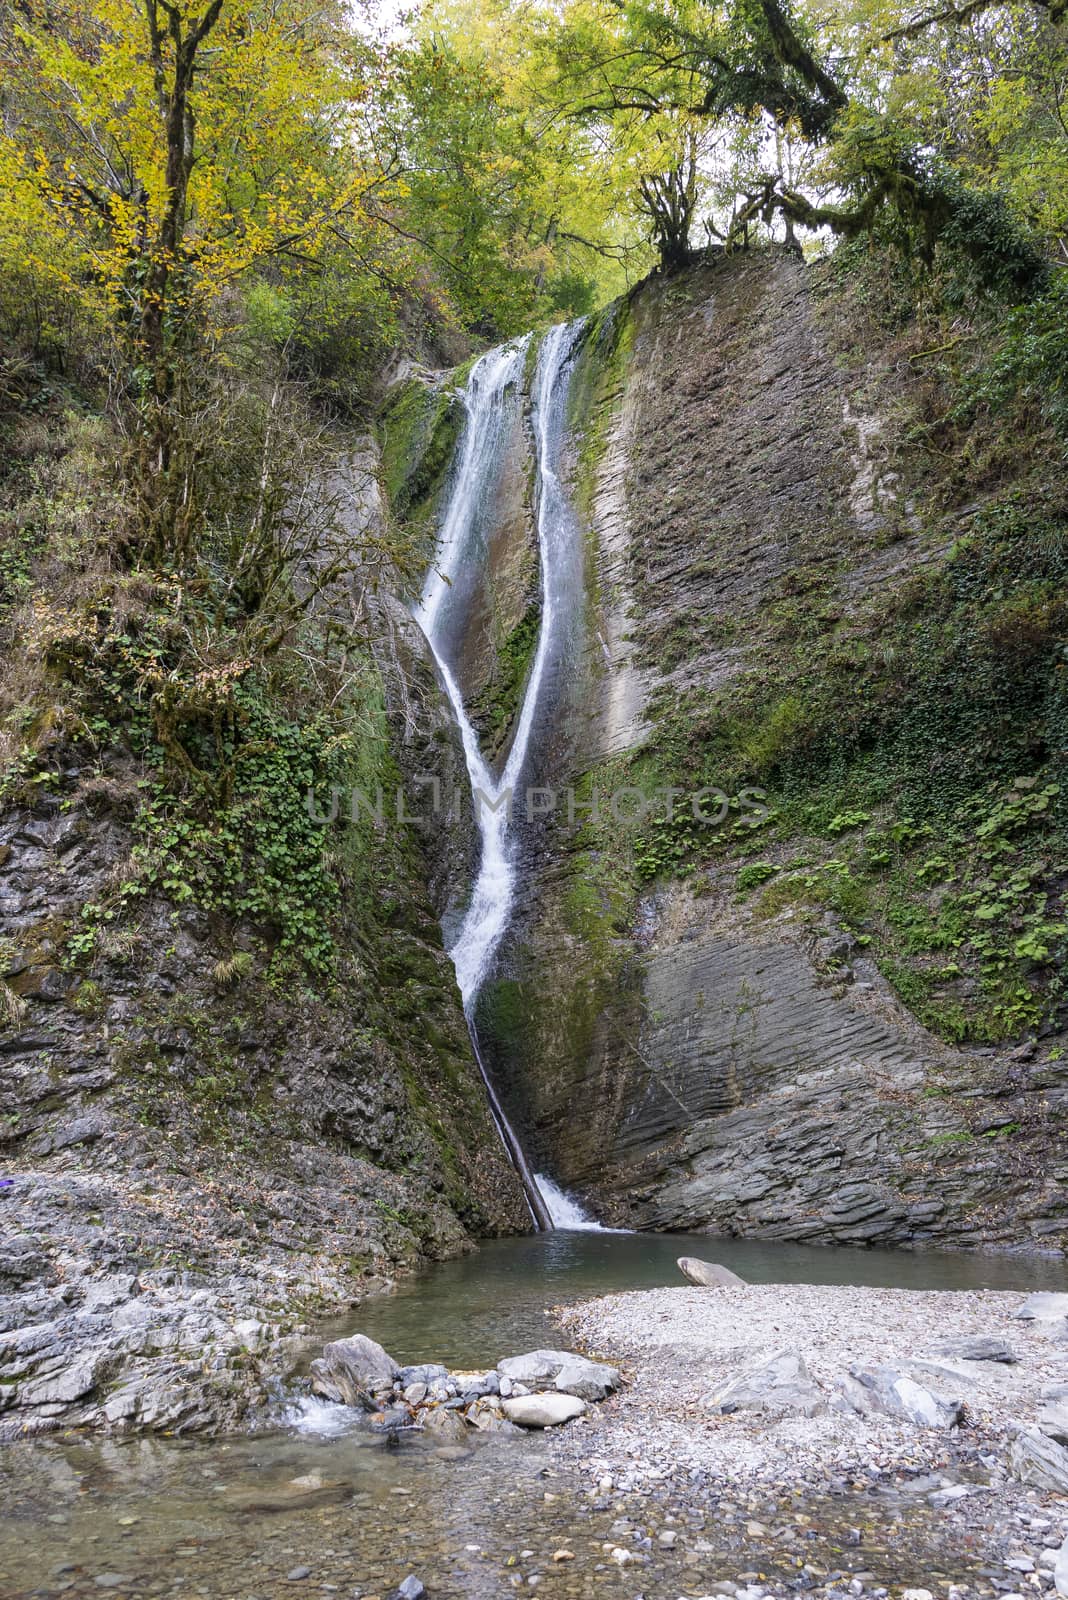 Orekhovsky waterfall is a tourist attraction near the city of Sochi, Russia. Clear day 29 October 2019 by butenkow